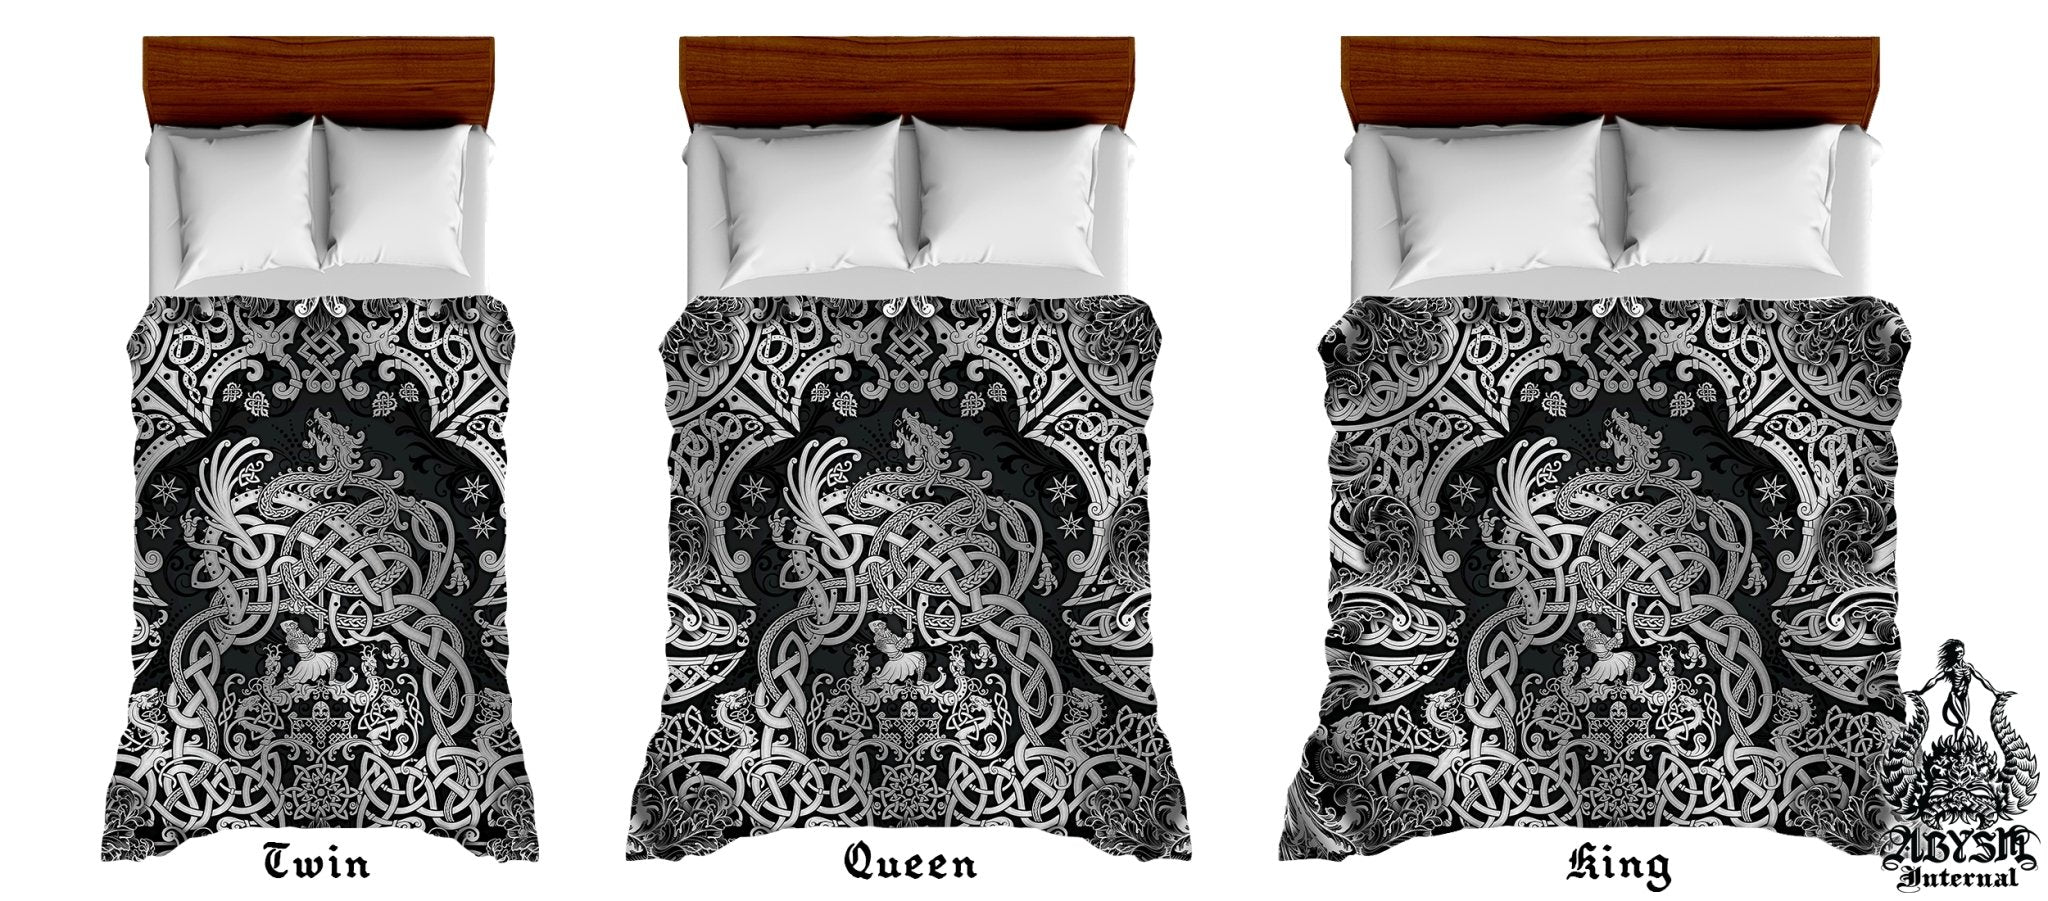 Viking Bedding Set, Comforter and Duvet, Norse Bed Cover and Bedroom Decor, Nordic Art, Sigurd kills Dragon Fafnir, King, Queen and Twin Size - Dark - Abysm Internal